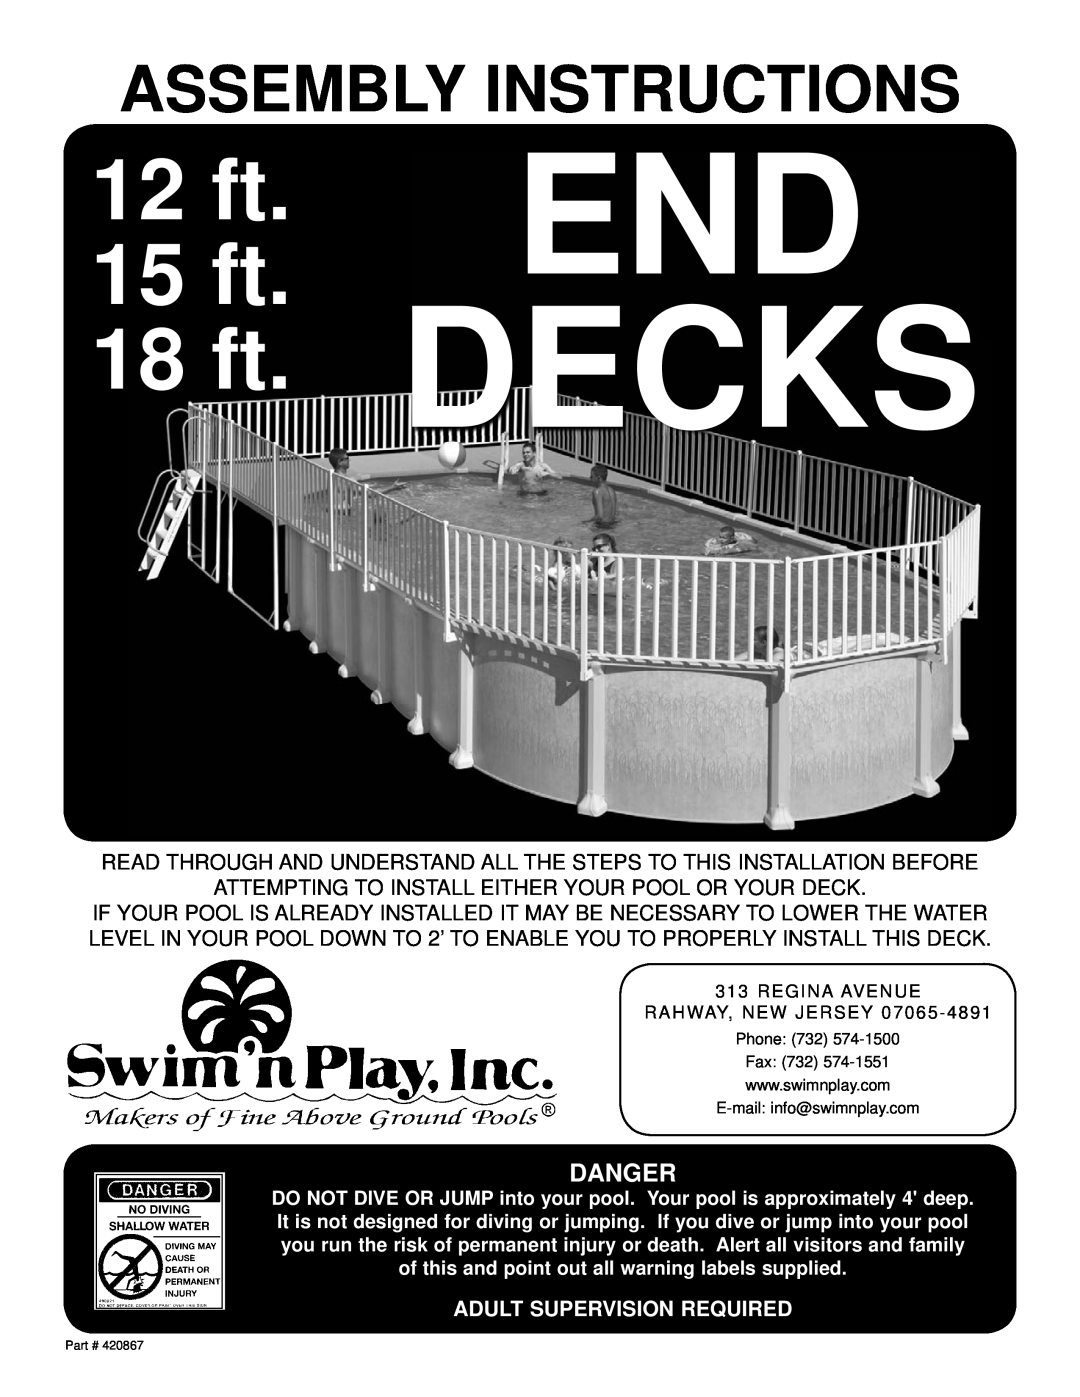 Swim'n Play end deck manual End Decks, 12ft 15ft 18ft, Assembly Instructions, Danger, Adult Supervision Required 